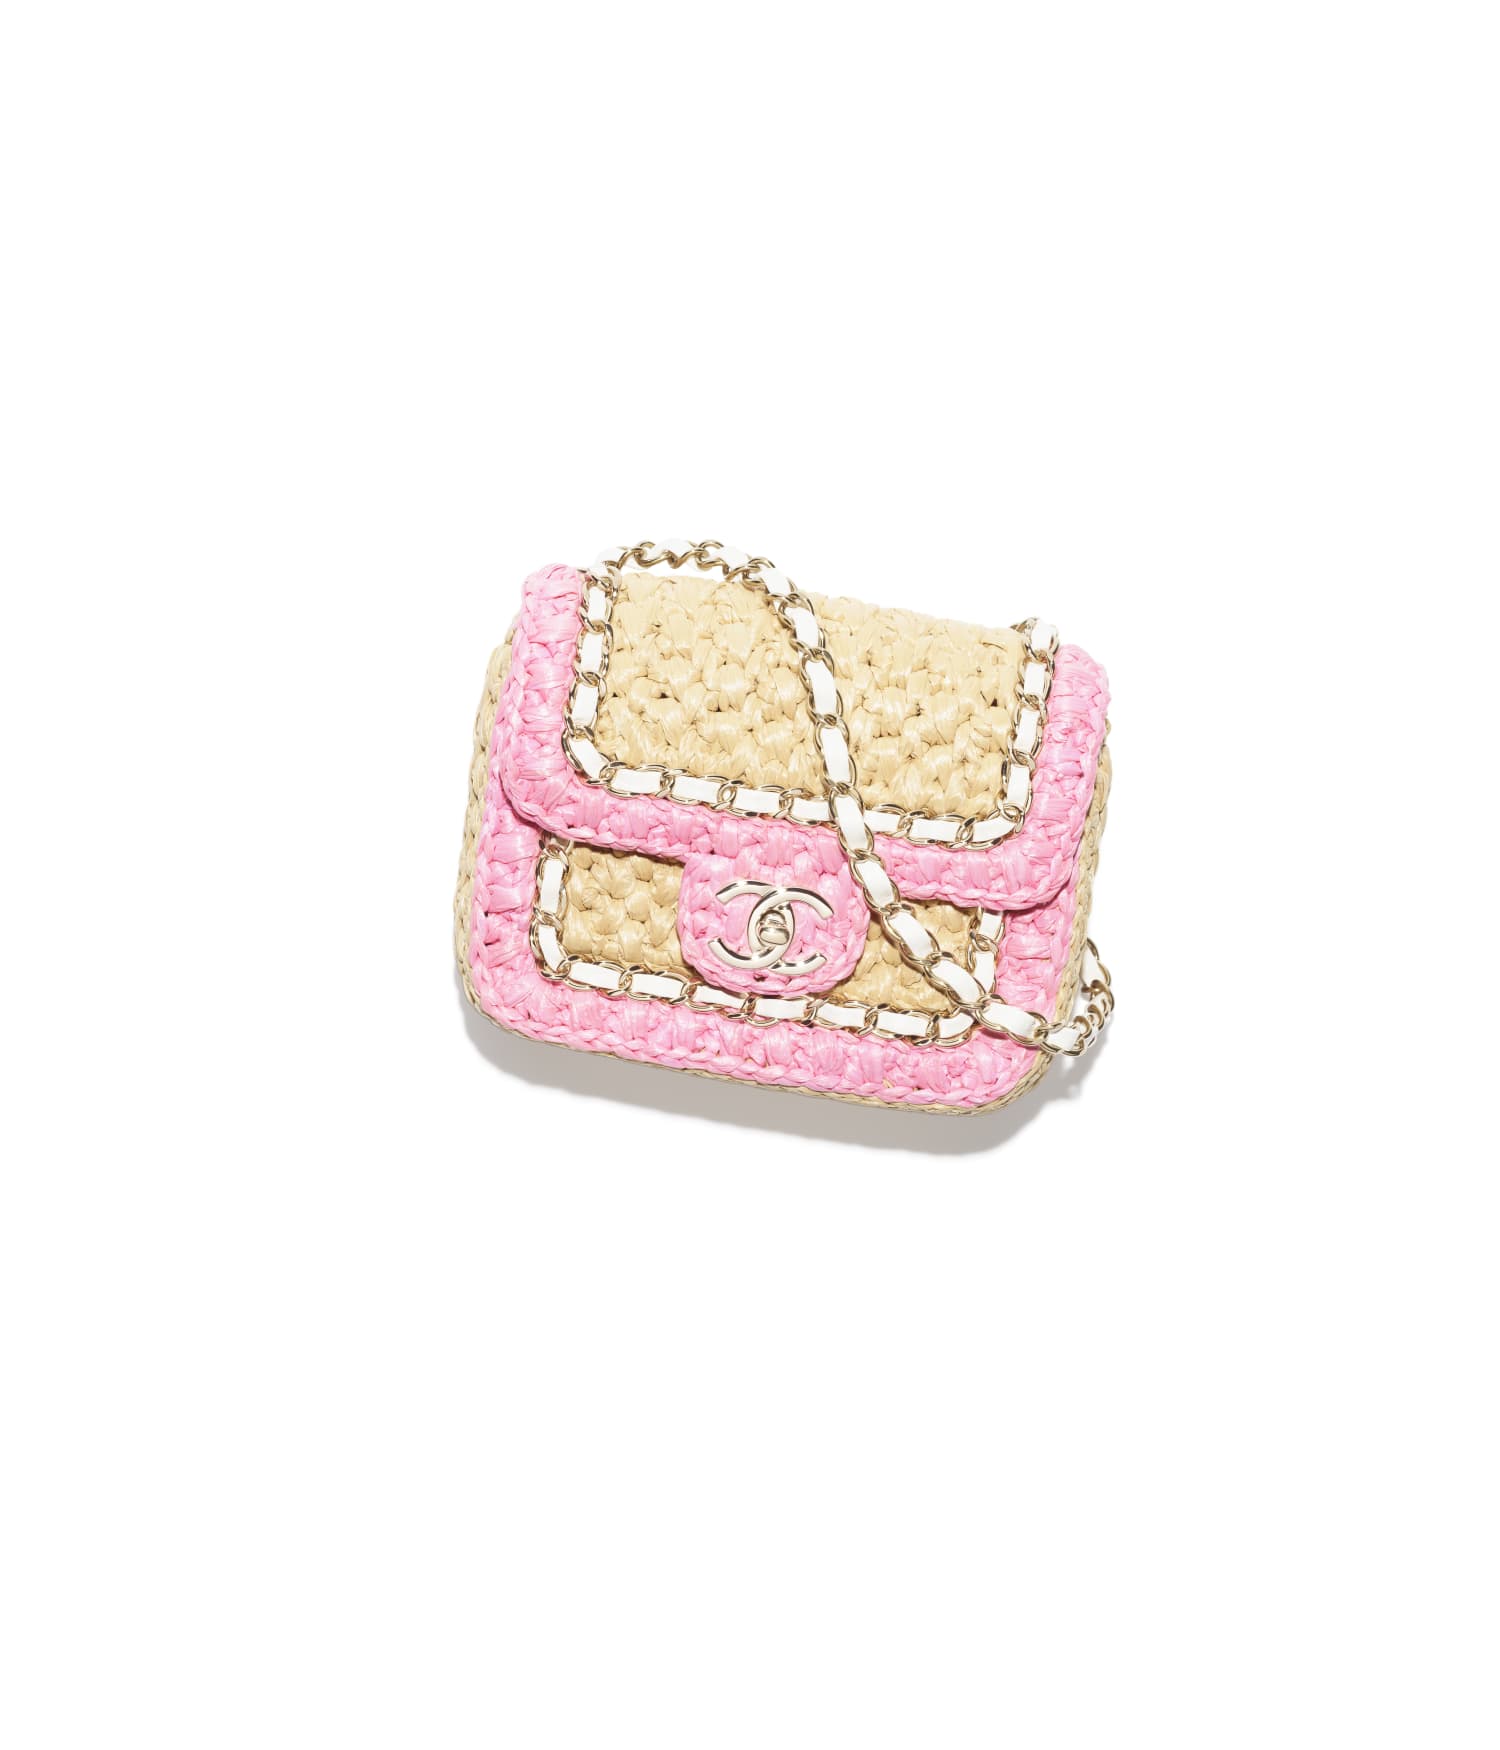 chanel_bag-in-beige-and-pink-raffia-and-metal-as4556-b14884-nt367-hd-LD